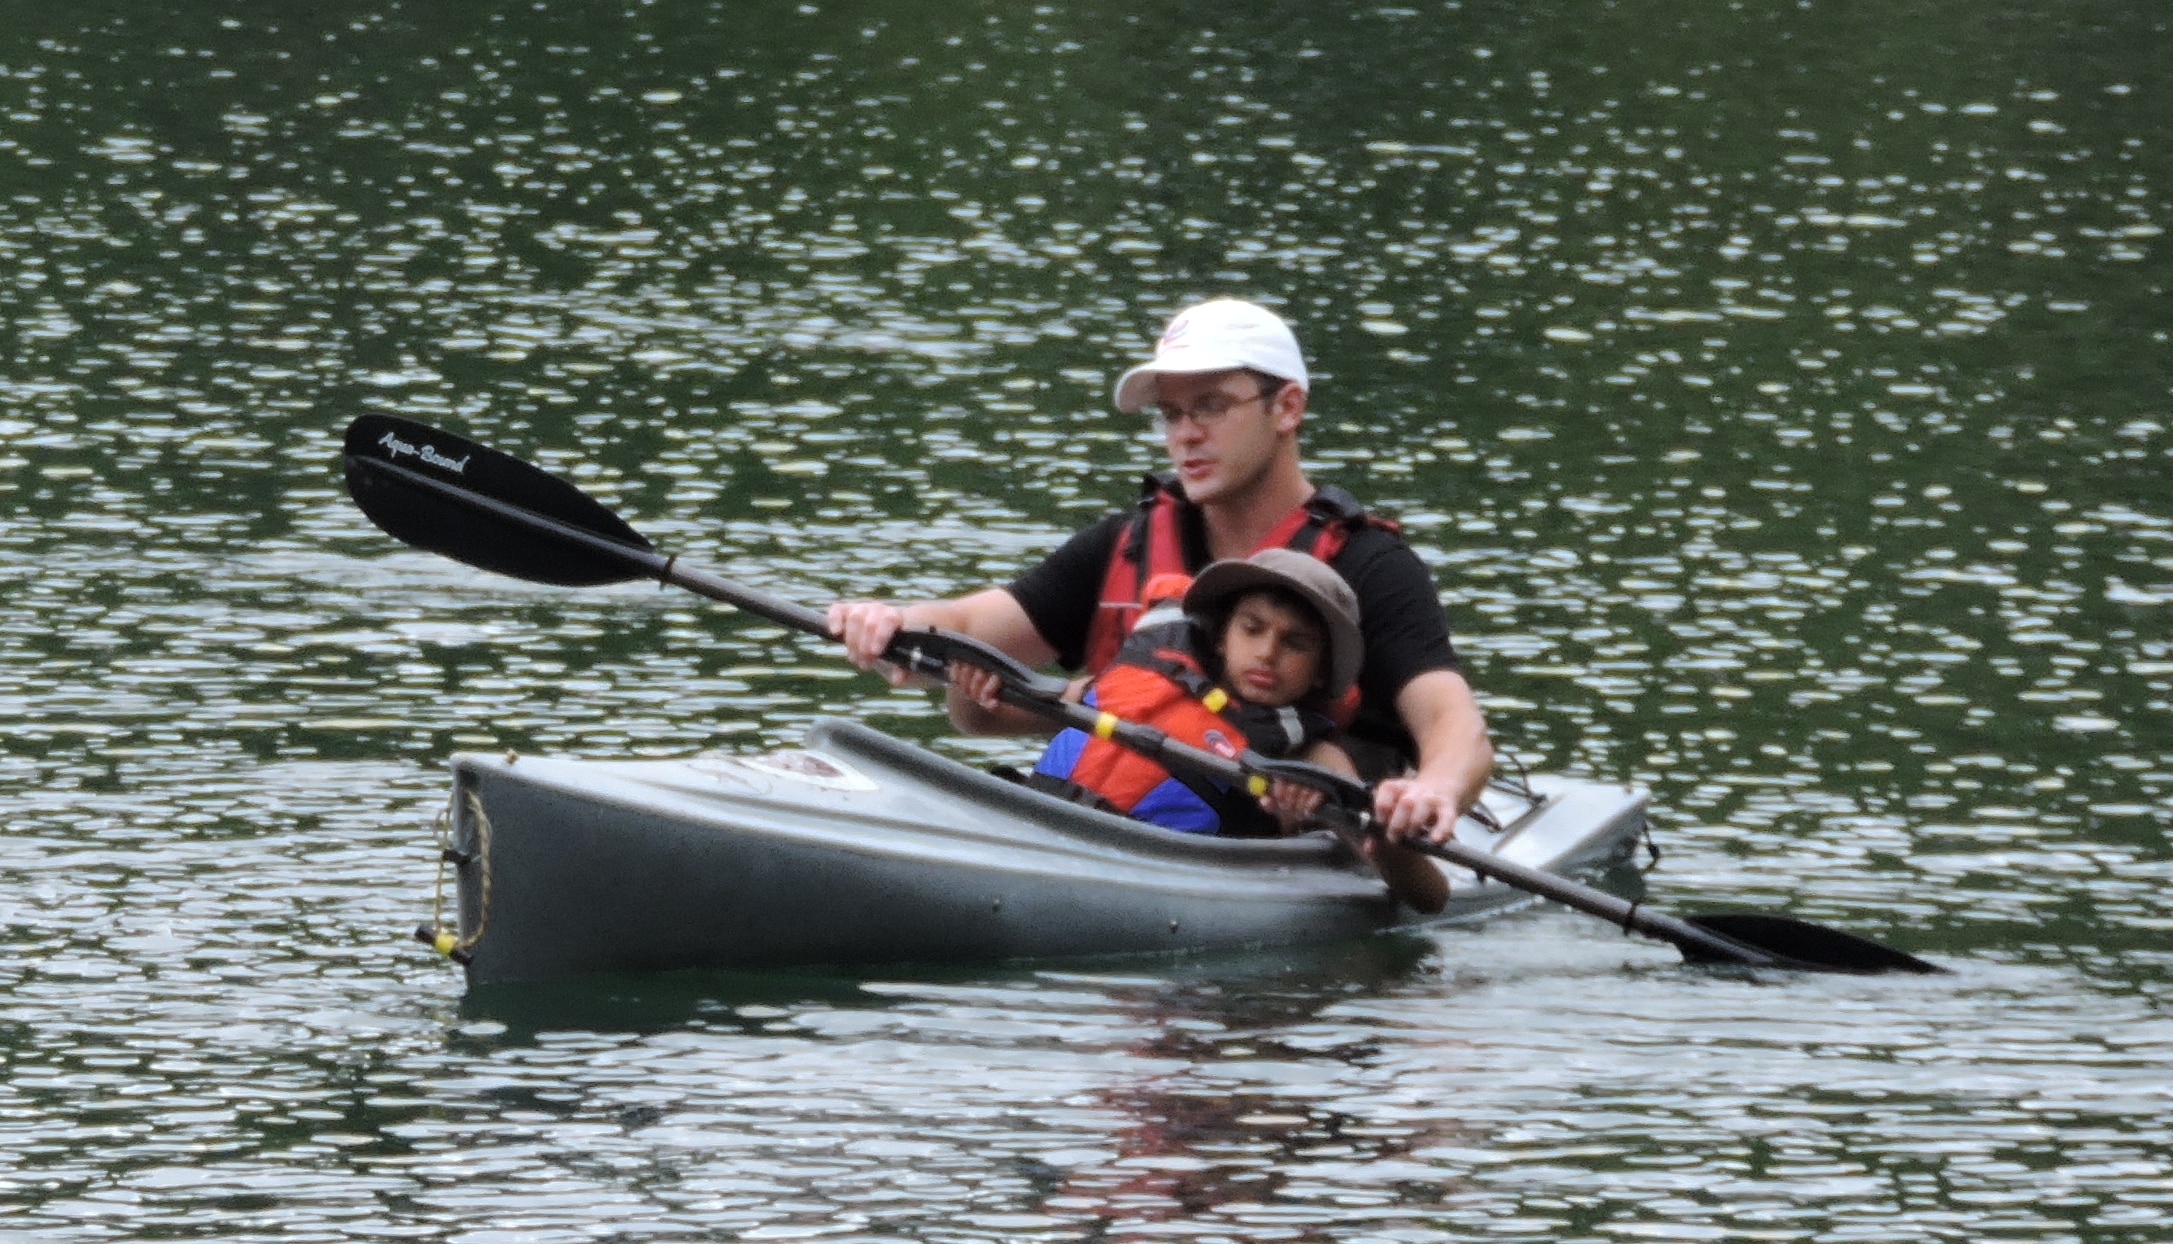 A child sits in the lap of an adult in a kayak. They are both holding a paddle and paddling together.